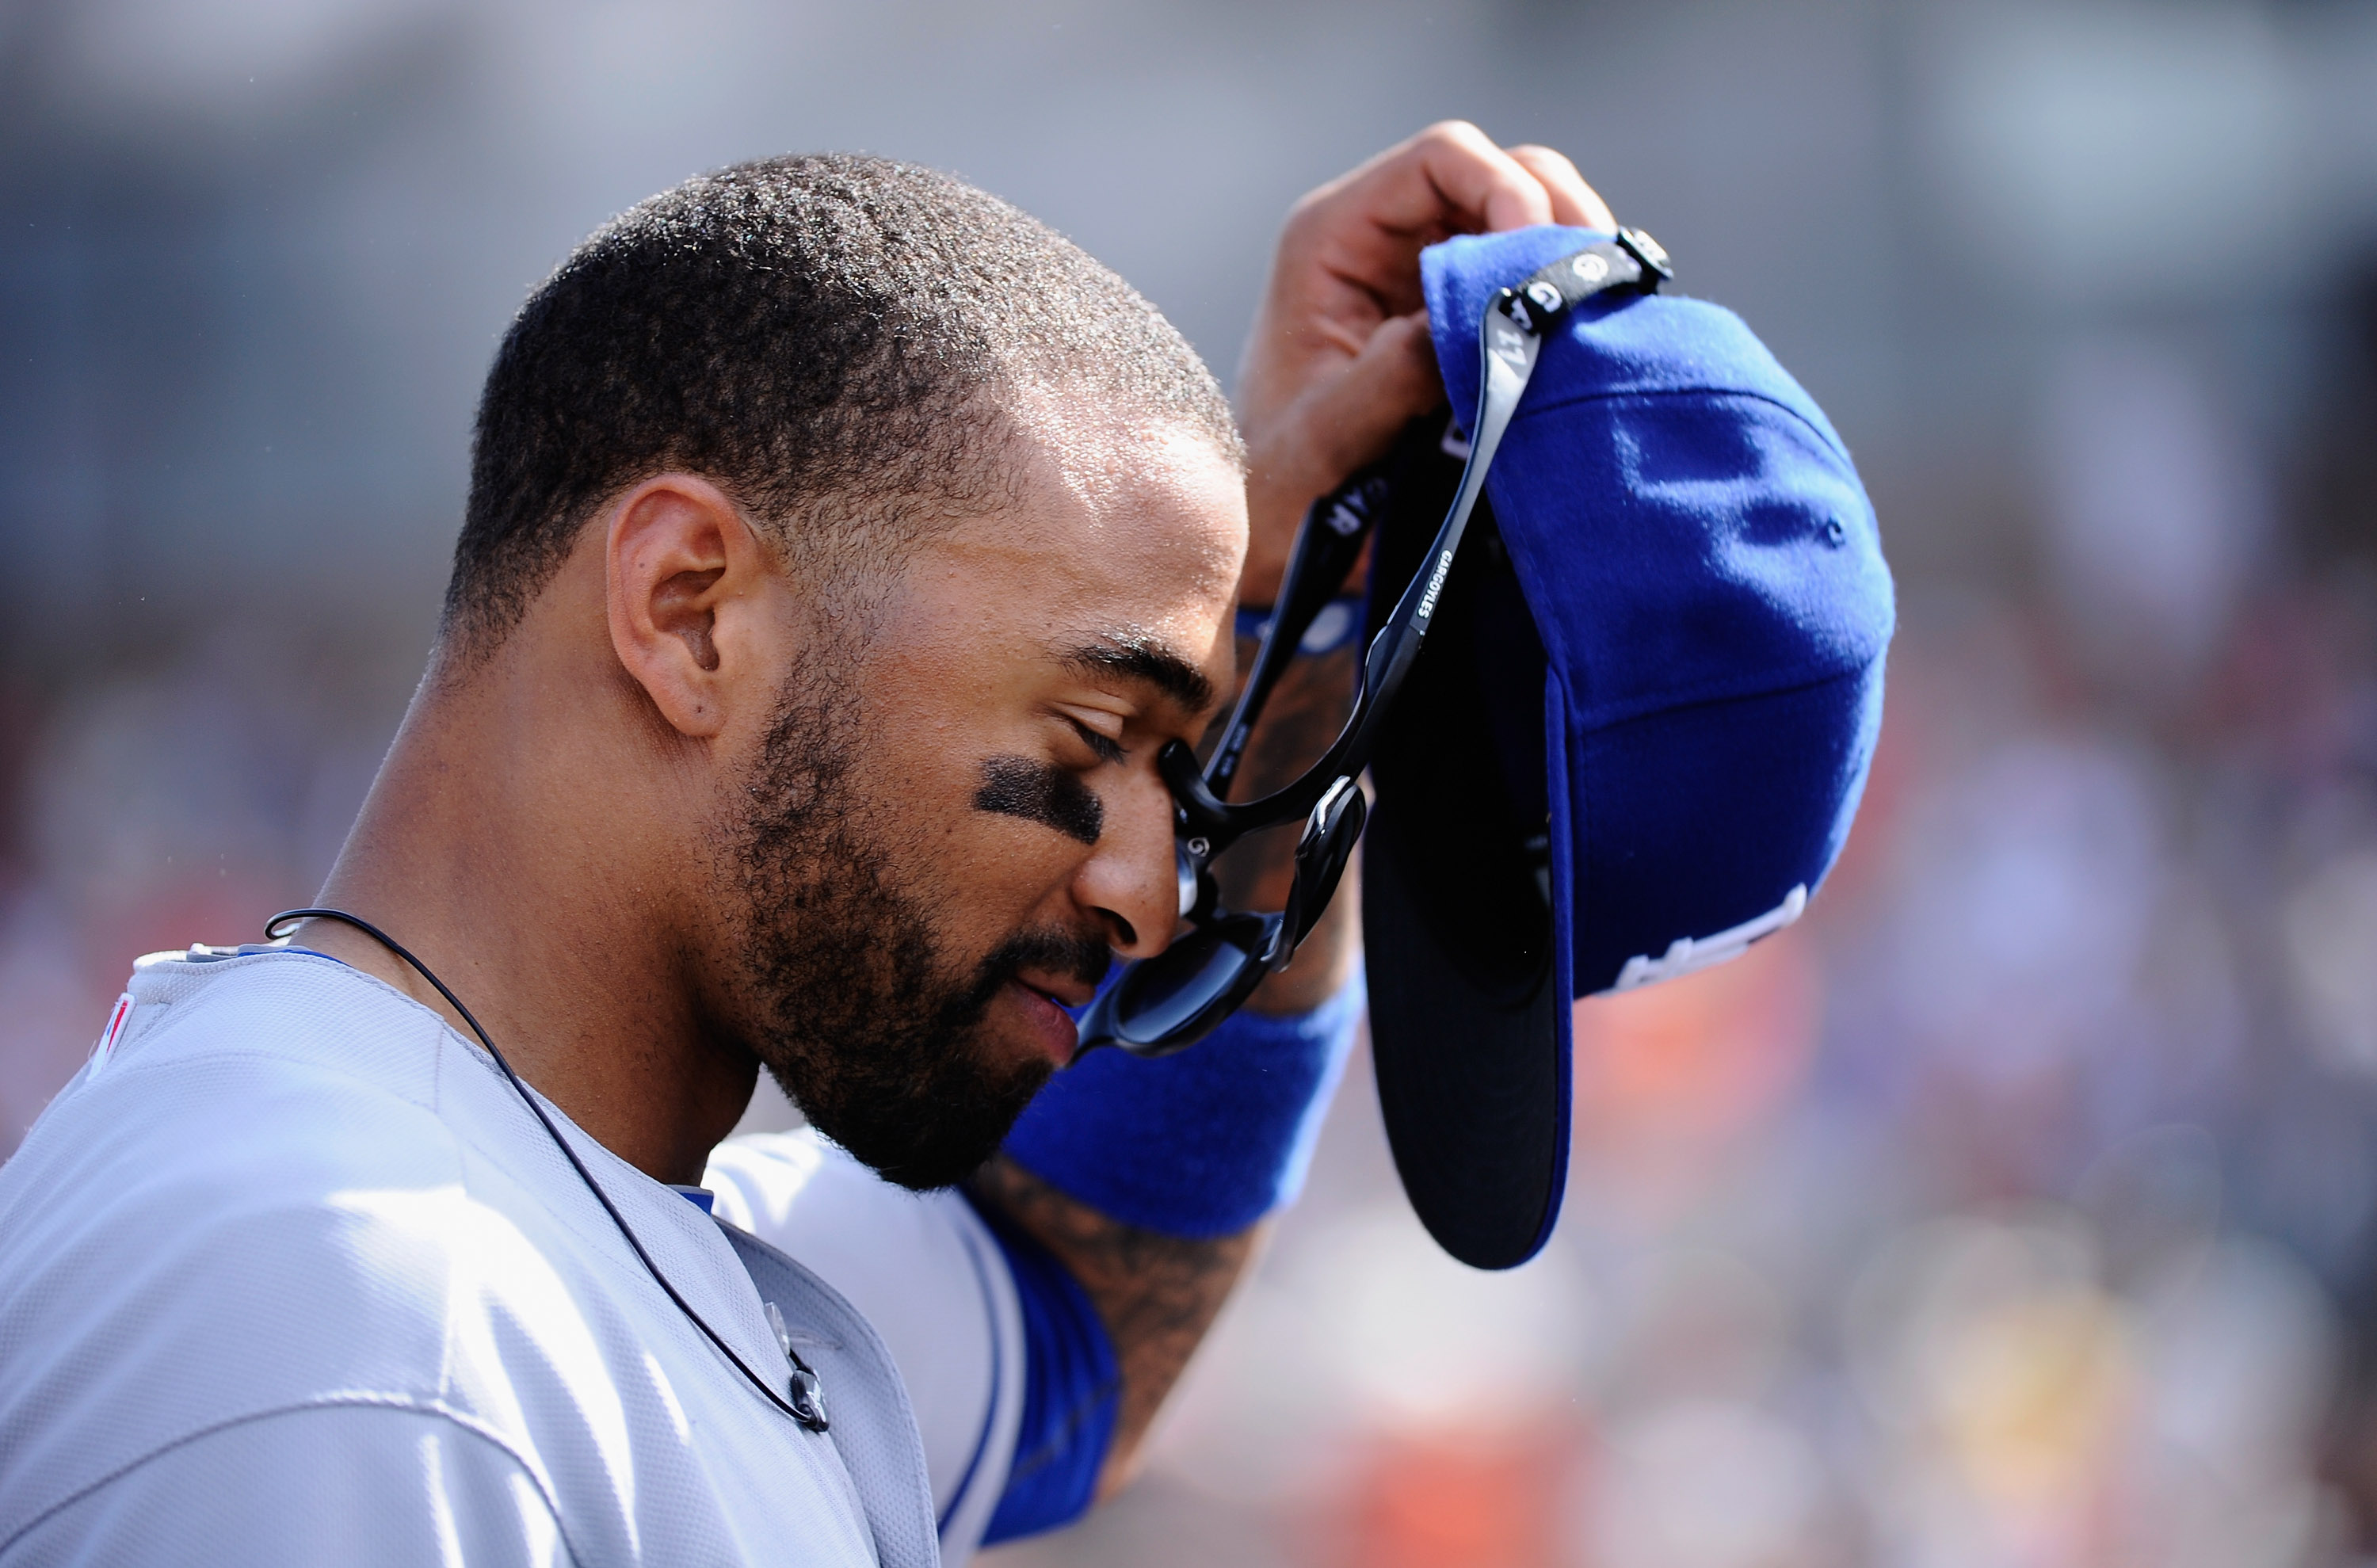 SCOTTSDALE, AZ - MARCH 18:  Matt Kemp #27 of the Los Angeles Dodgers takes off his baseball cap and glasses after misplaying a fly ball hit by Mike Fontenot #14 of the San Francisco Giants that scored two runs during the fifth inning of the baseball game